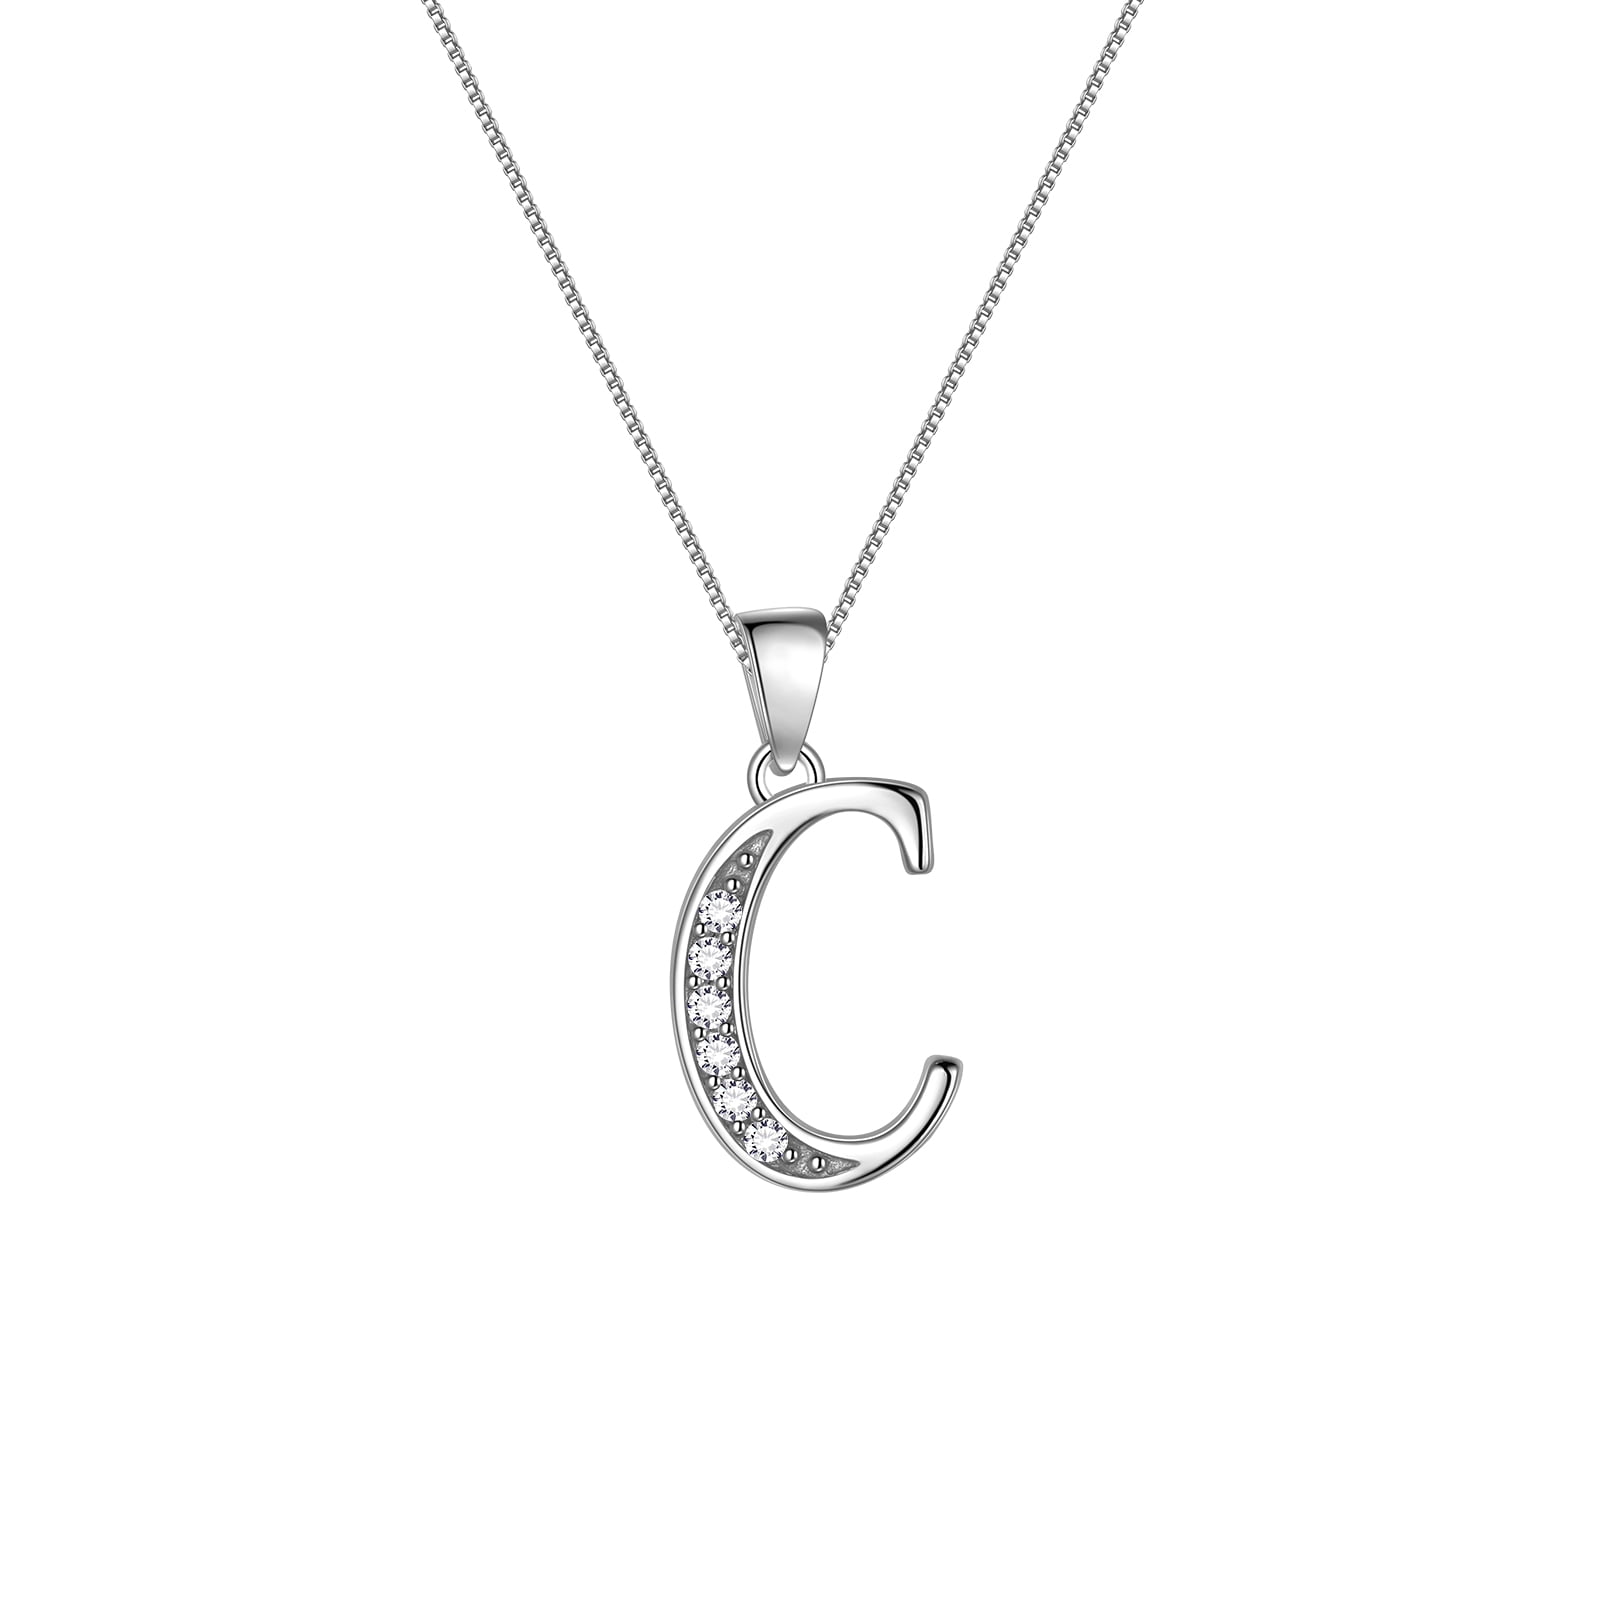 925 Sterling Silver Vintage Letter C Initial Charm Pendant